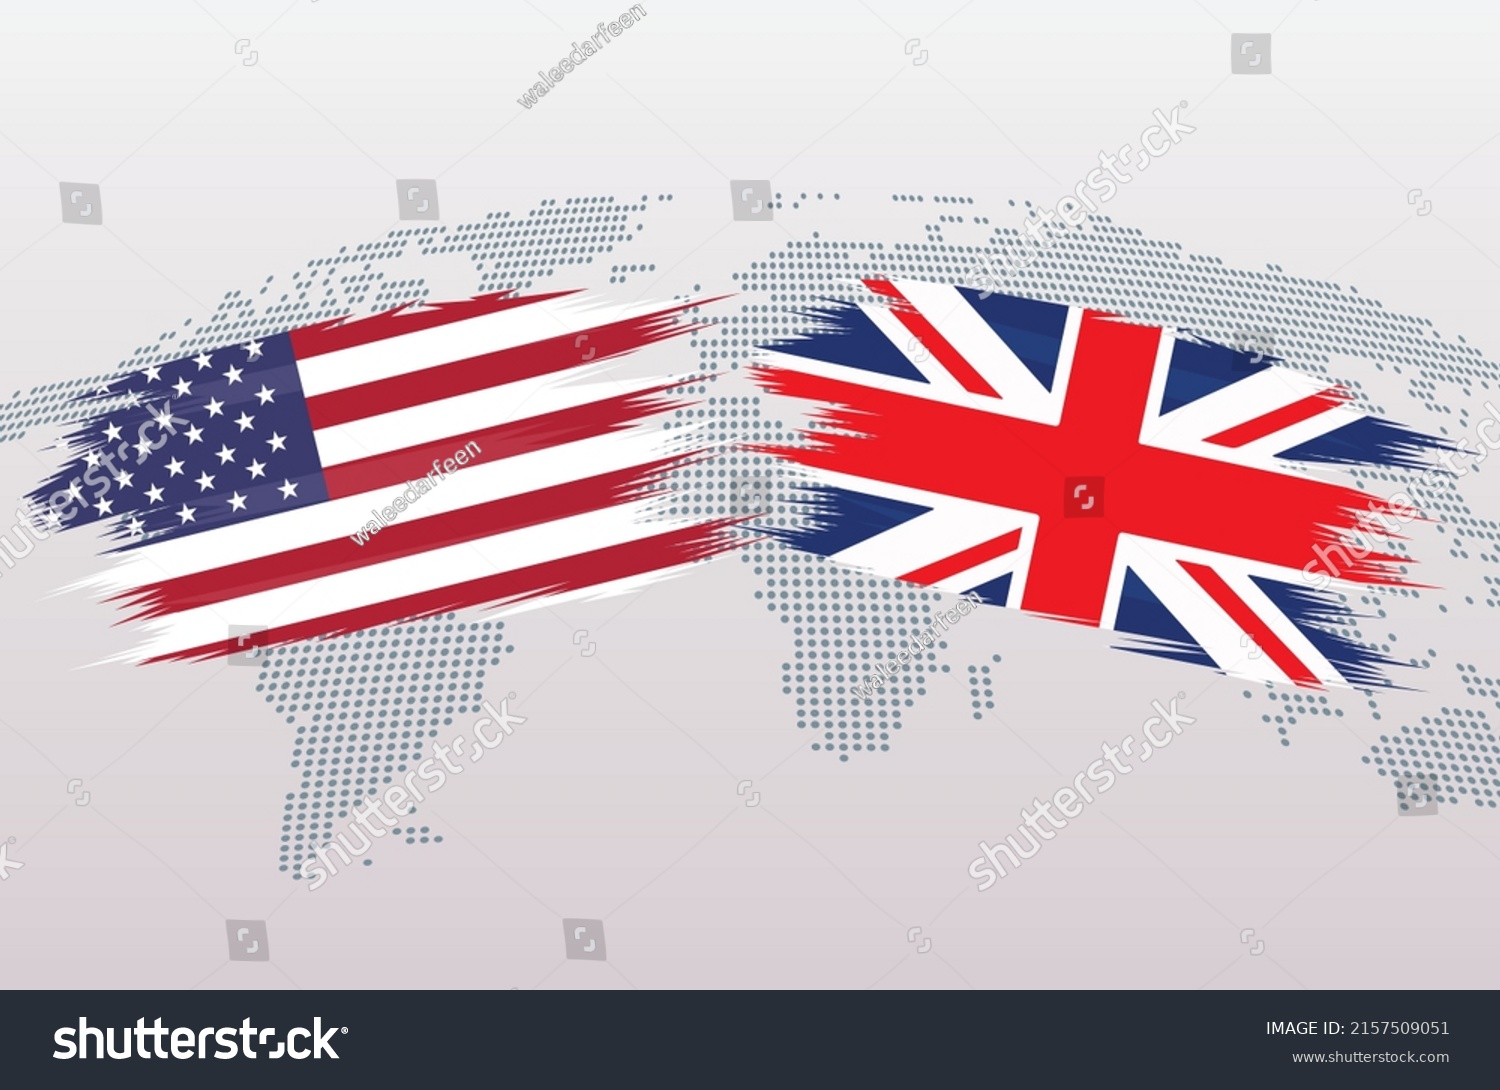 SVG of USA and UK flags. United Kingdom and American flags, isolated on grey world map background. Vector illustration. svg